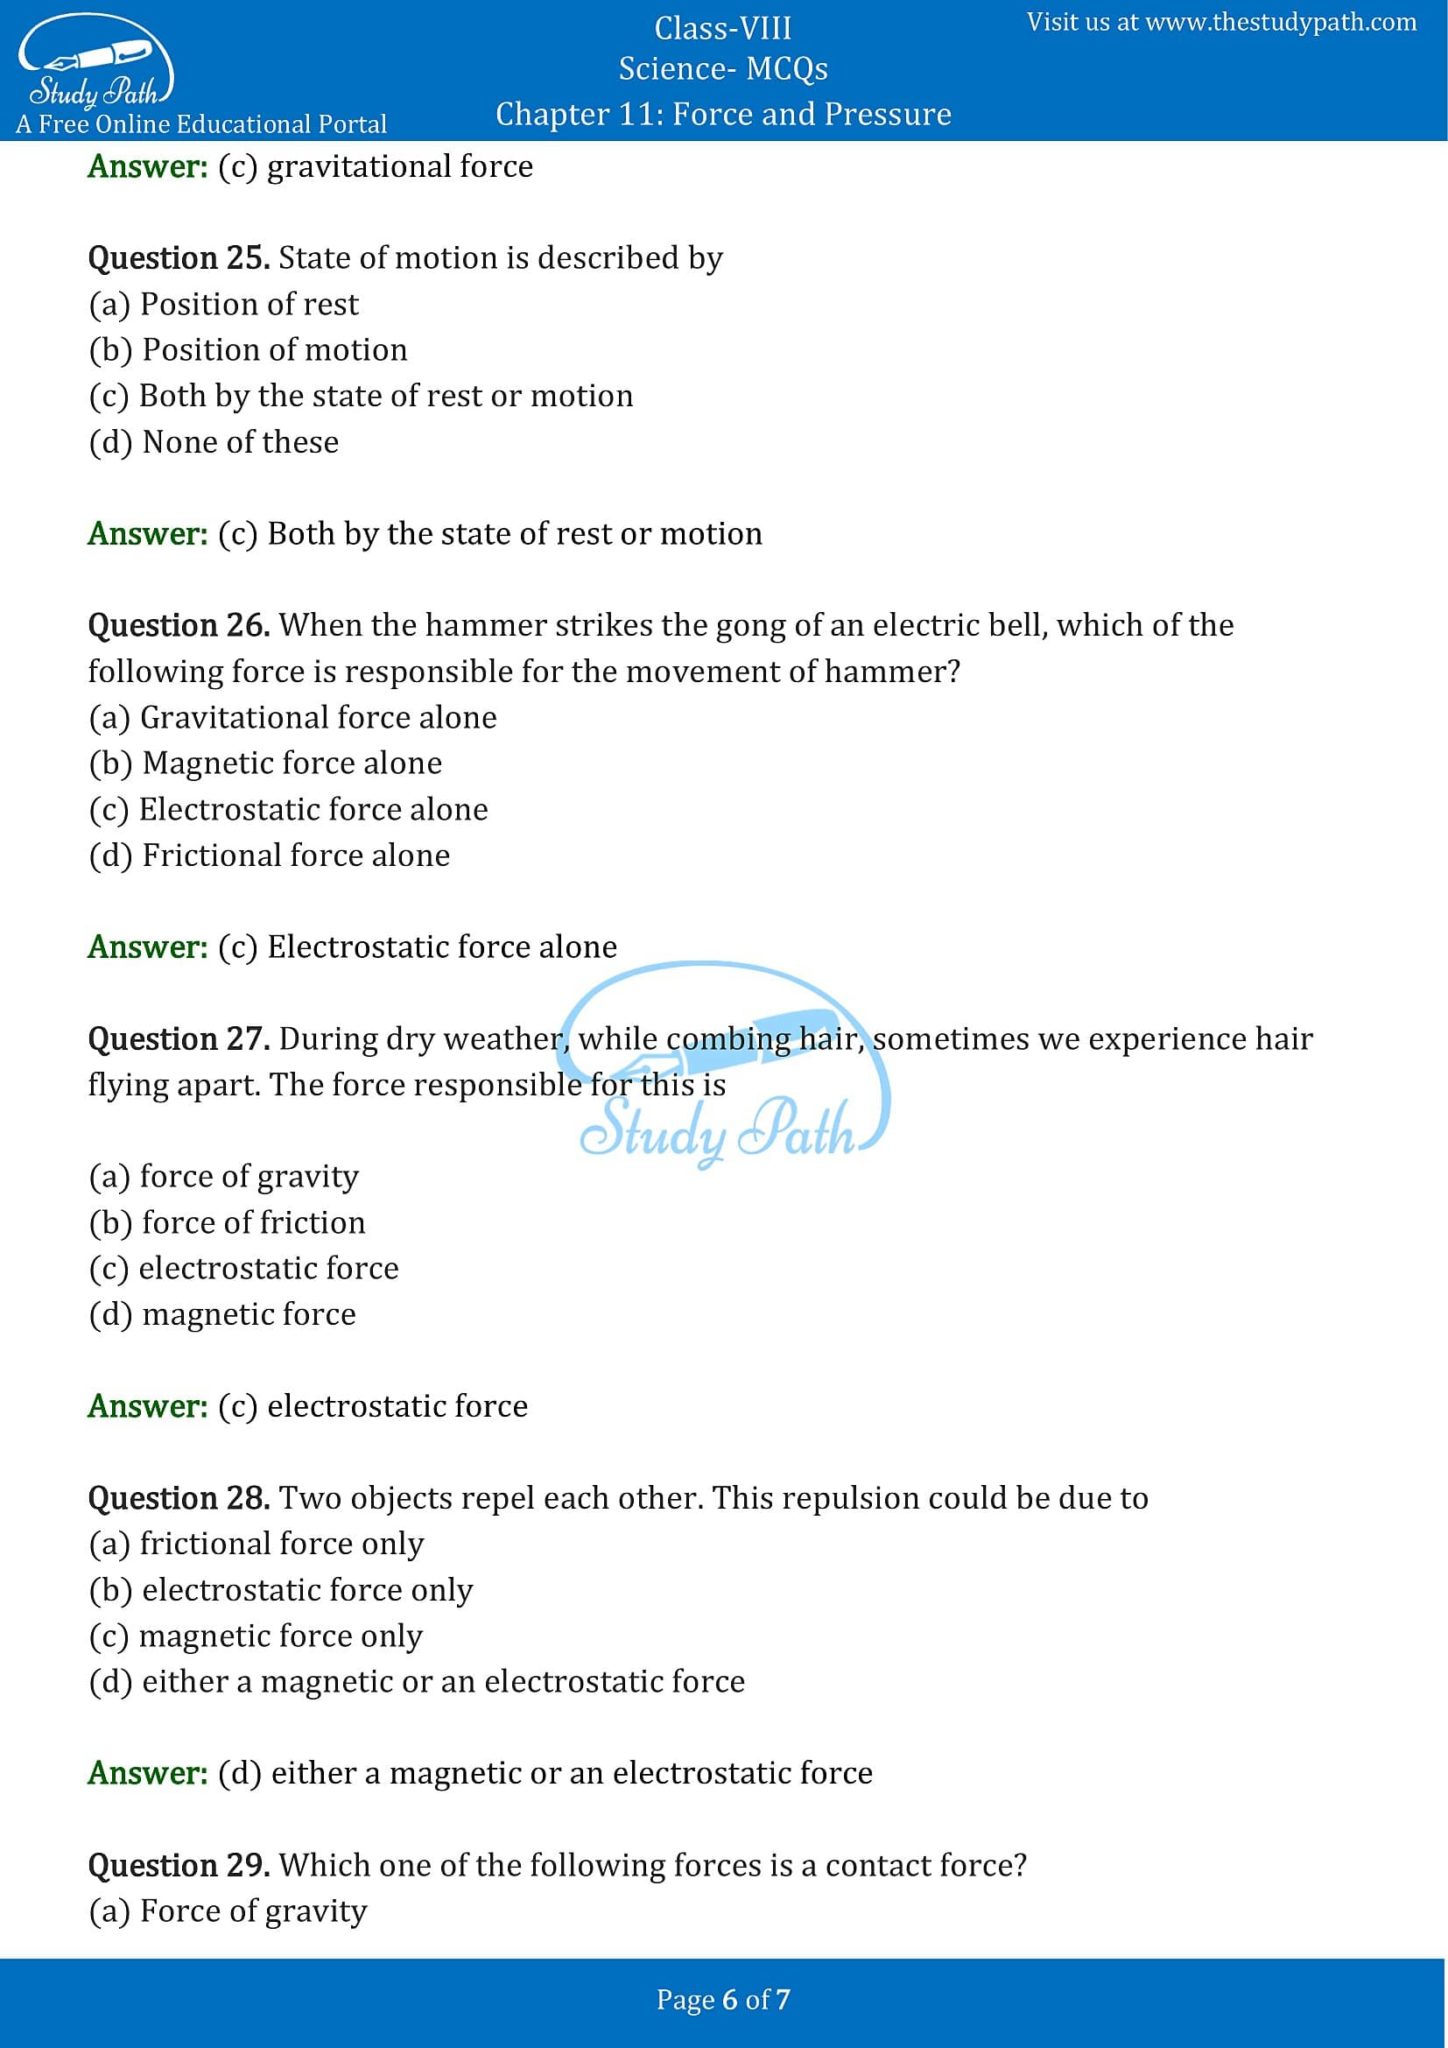 case study questions for force and pressure class 8